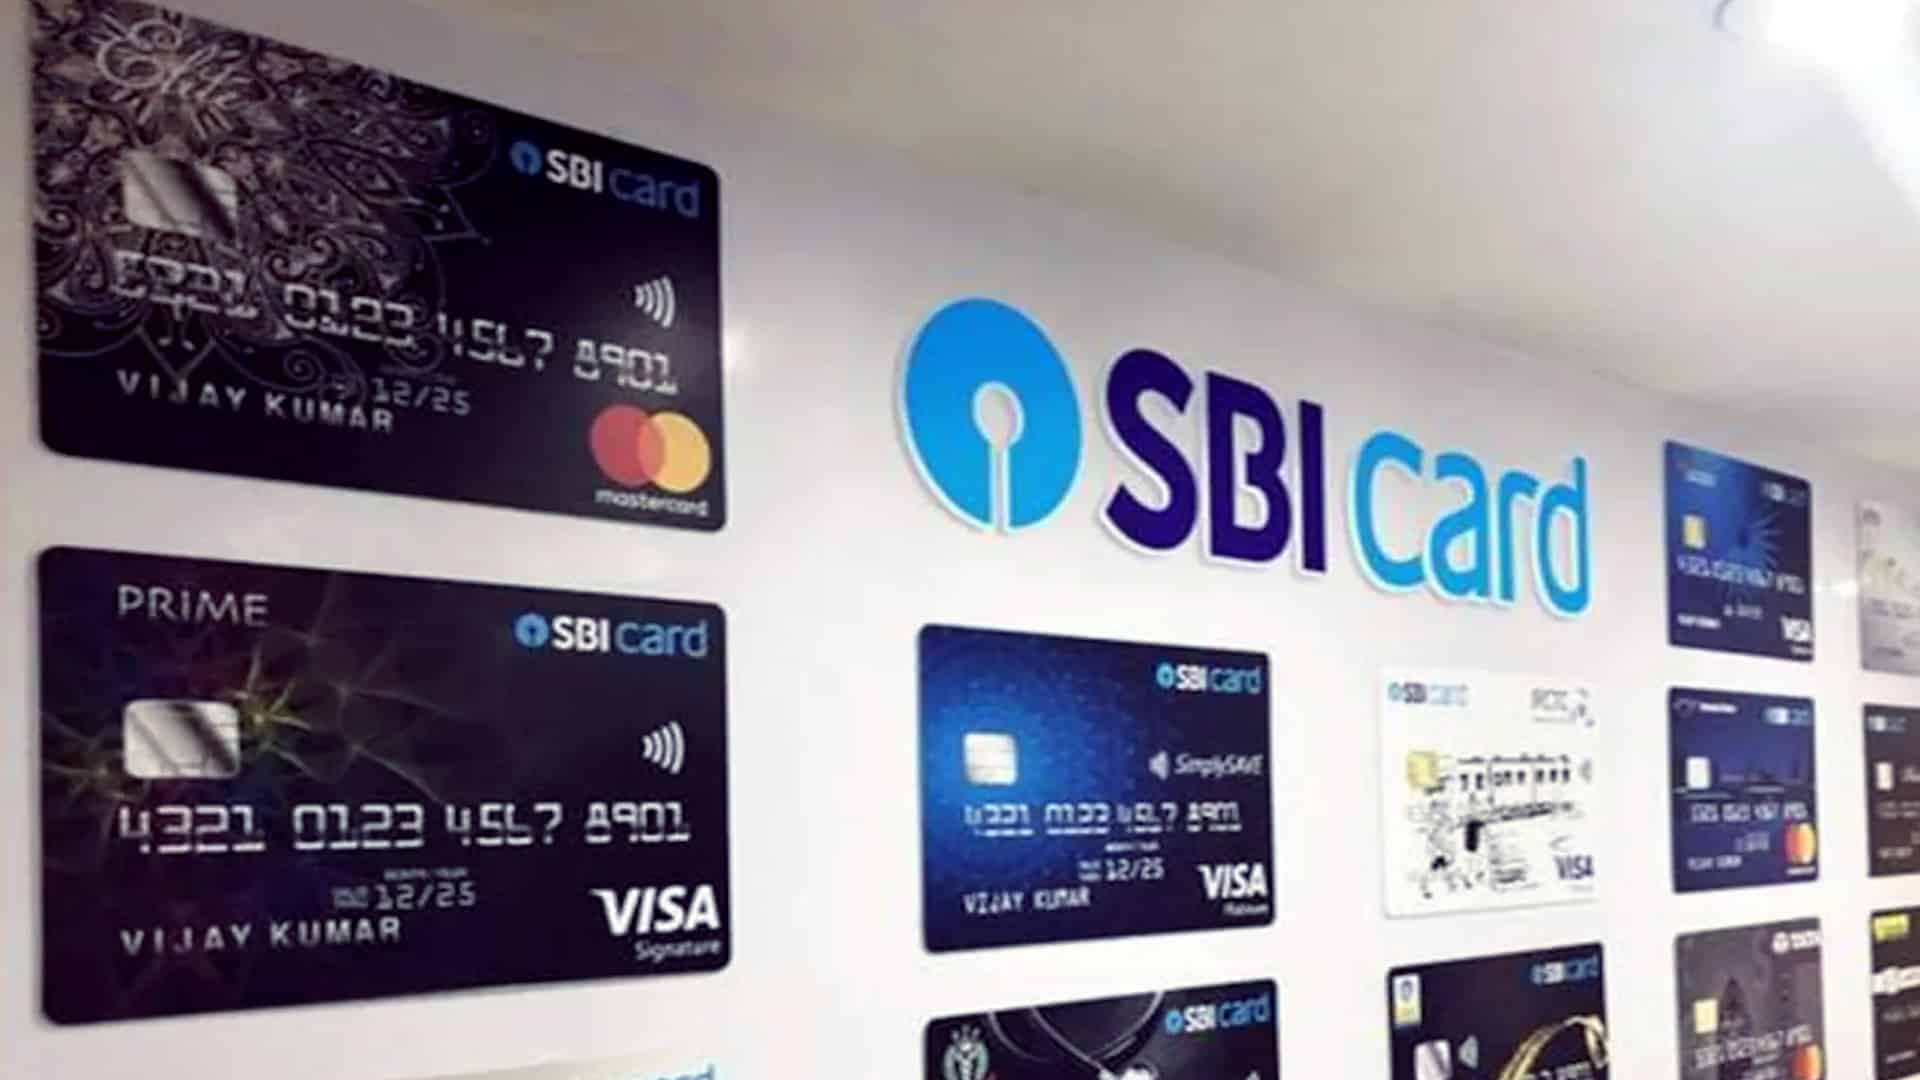 SBI Card to raise Rs 2,000 cr by issuing bonds